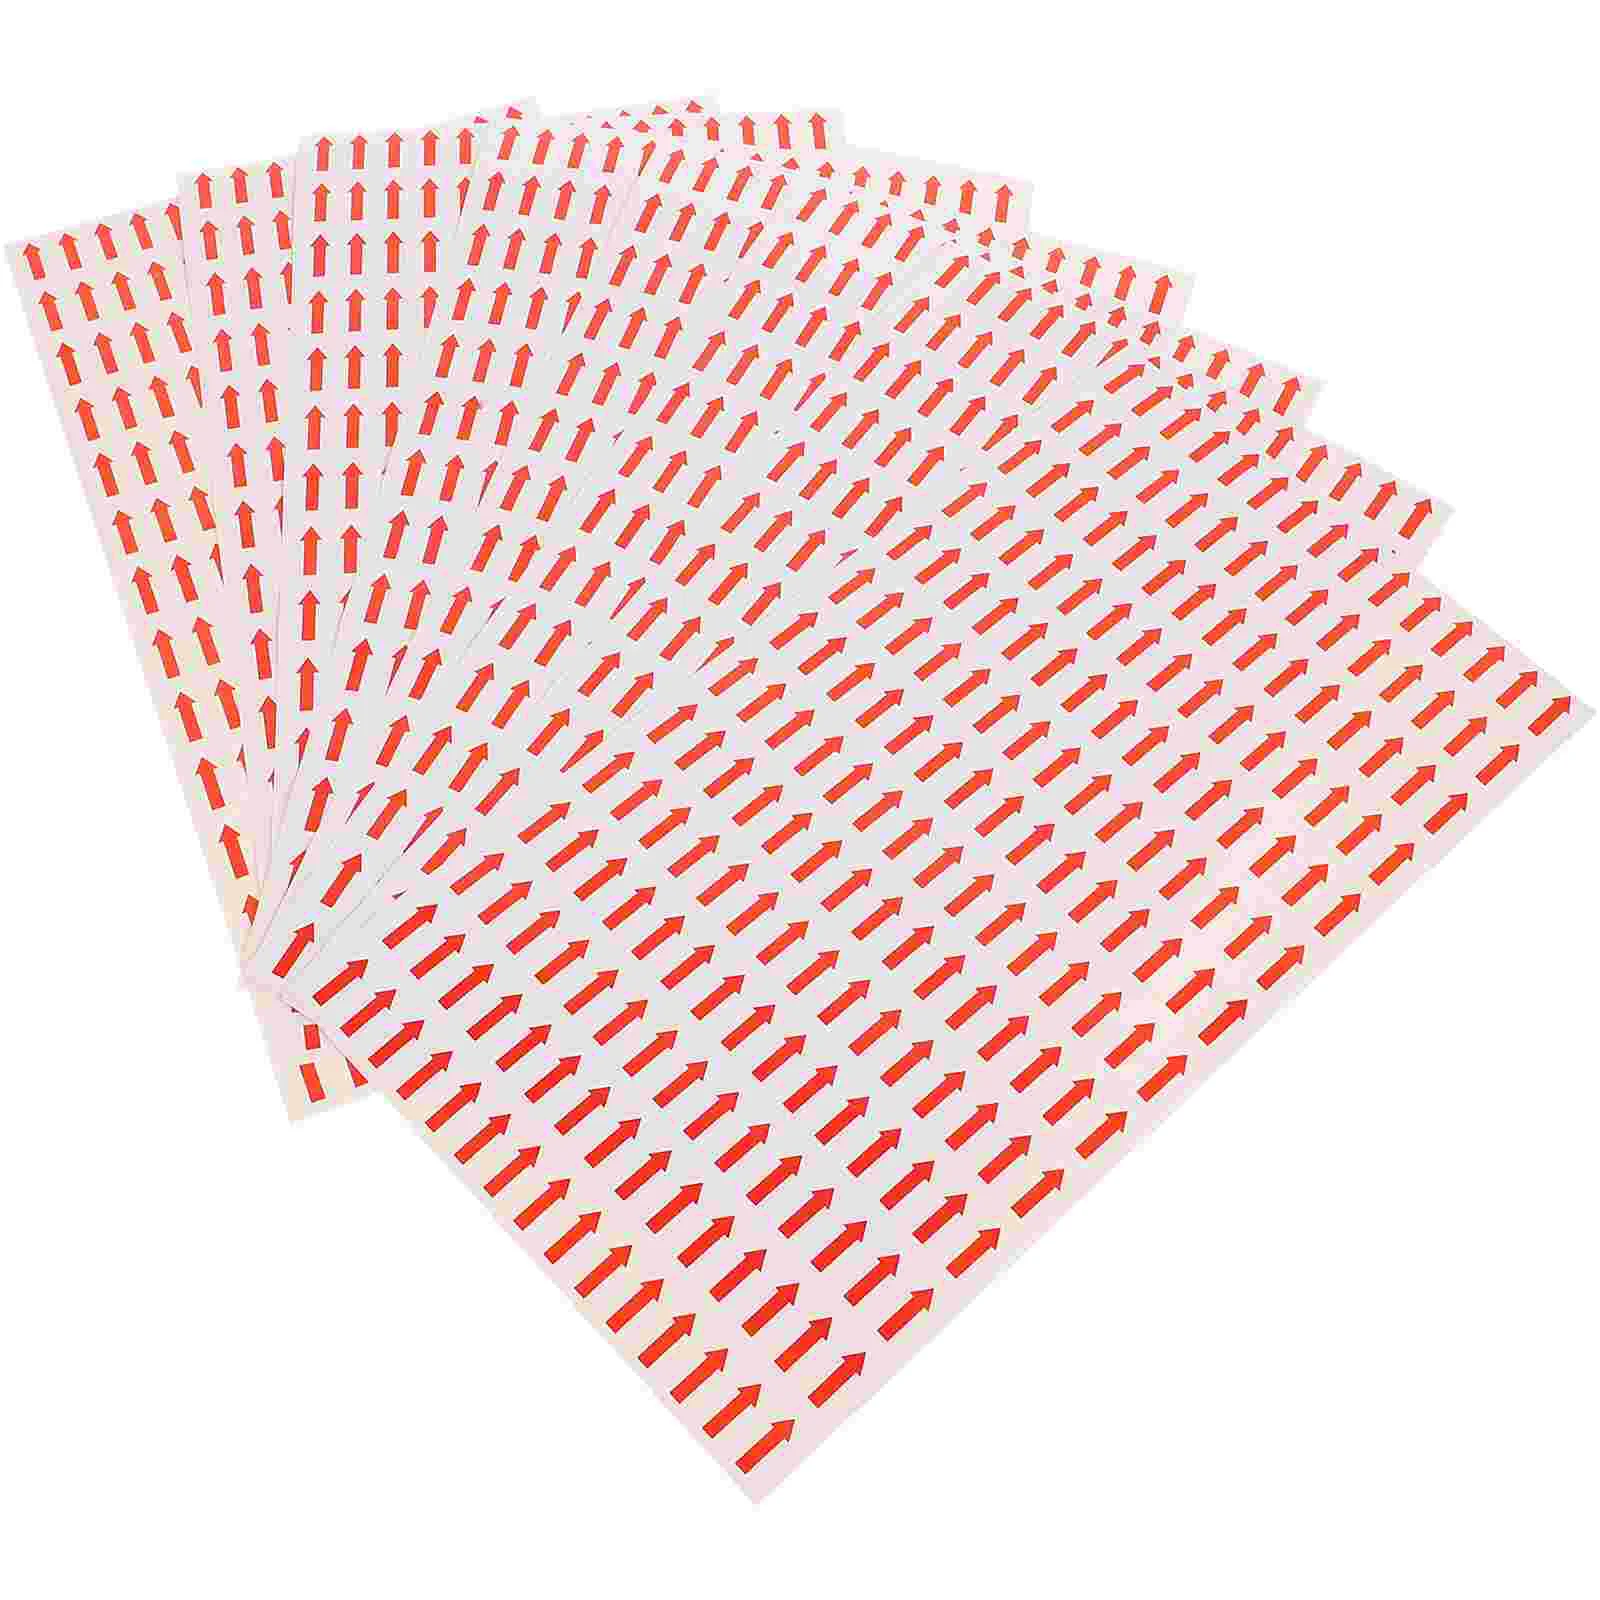 

50 Sheets of Arrow Label Stickers Indicator Tags Factory Repair Stickers Decals Direction Stickers